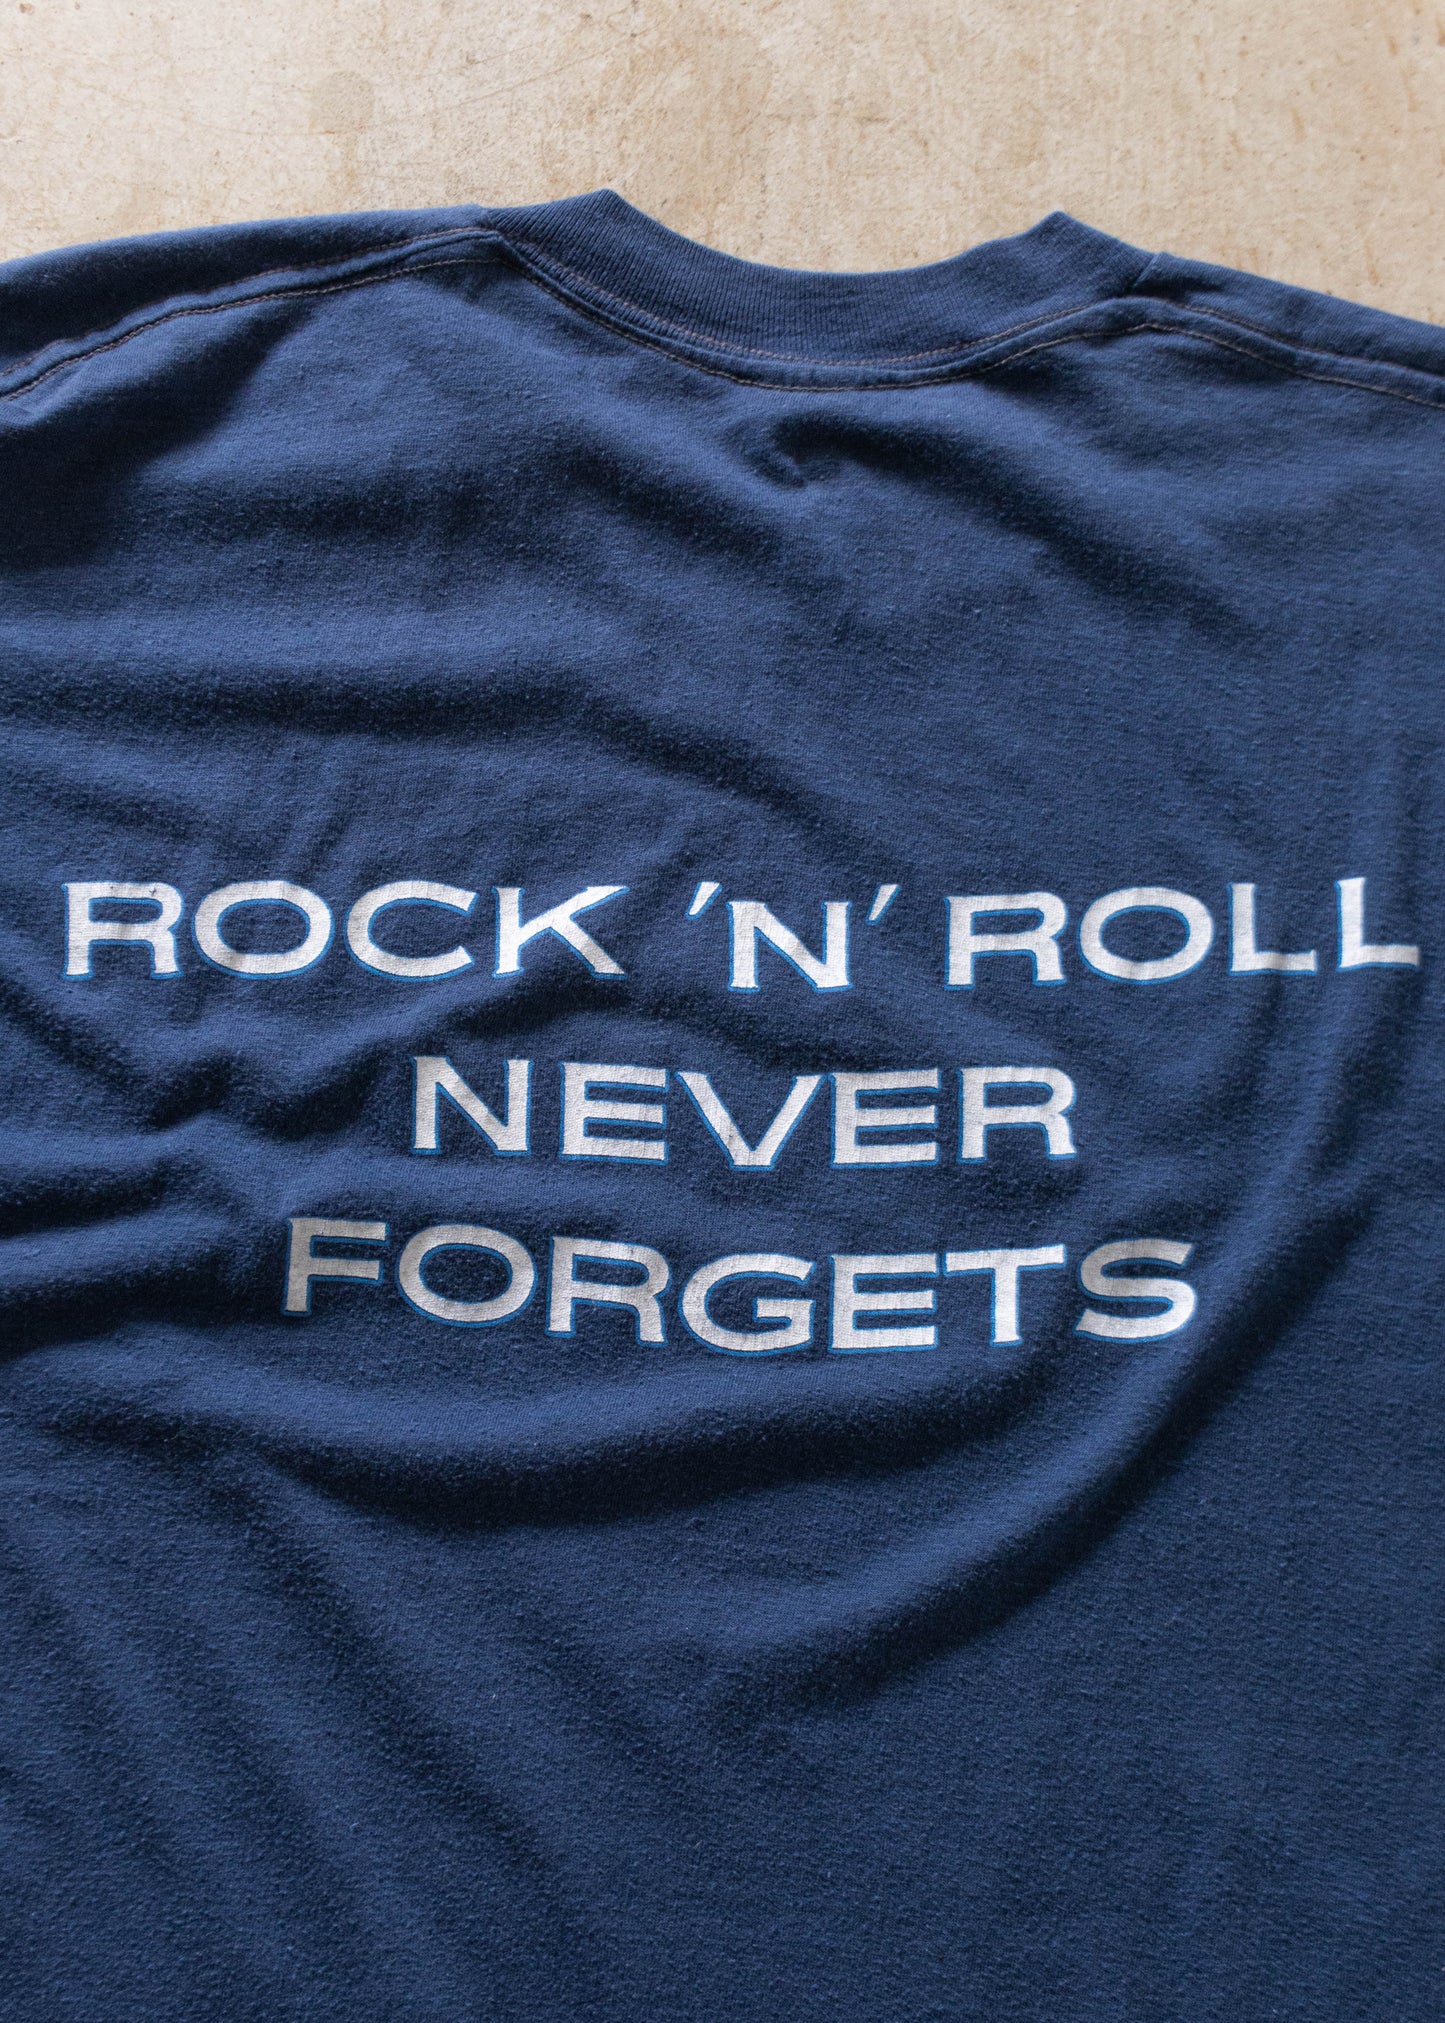 1986 Bob Seger And The Silver Bullet Band Rock'N'Roll Never Forgets T-Shirt Size M/L